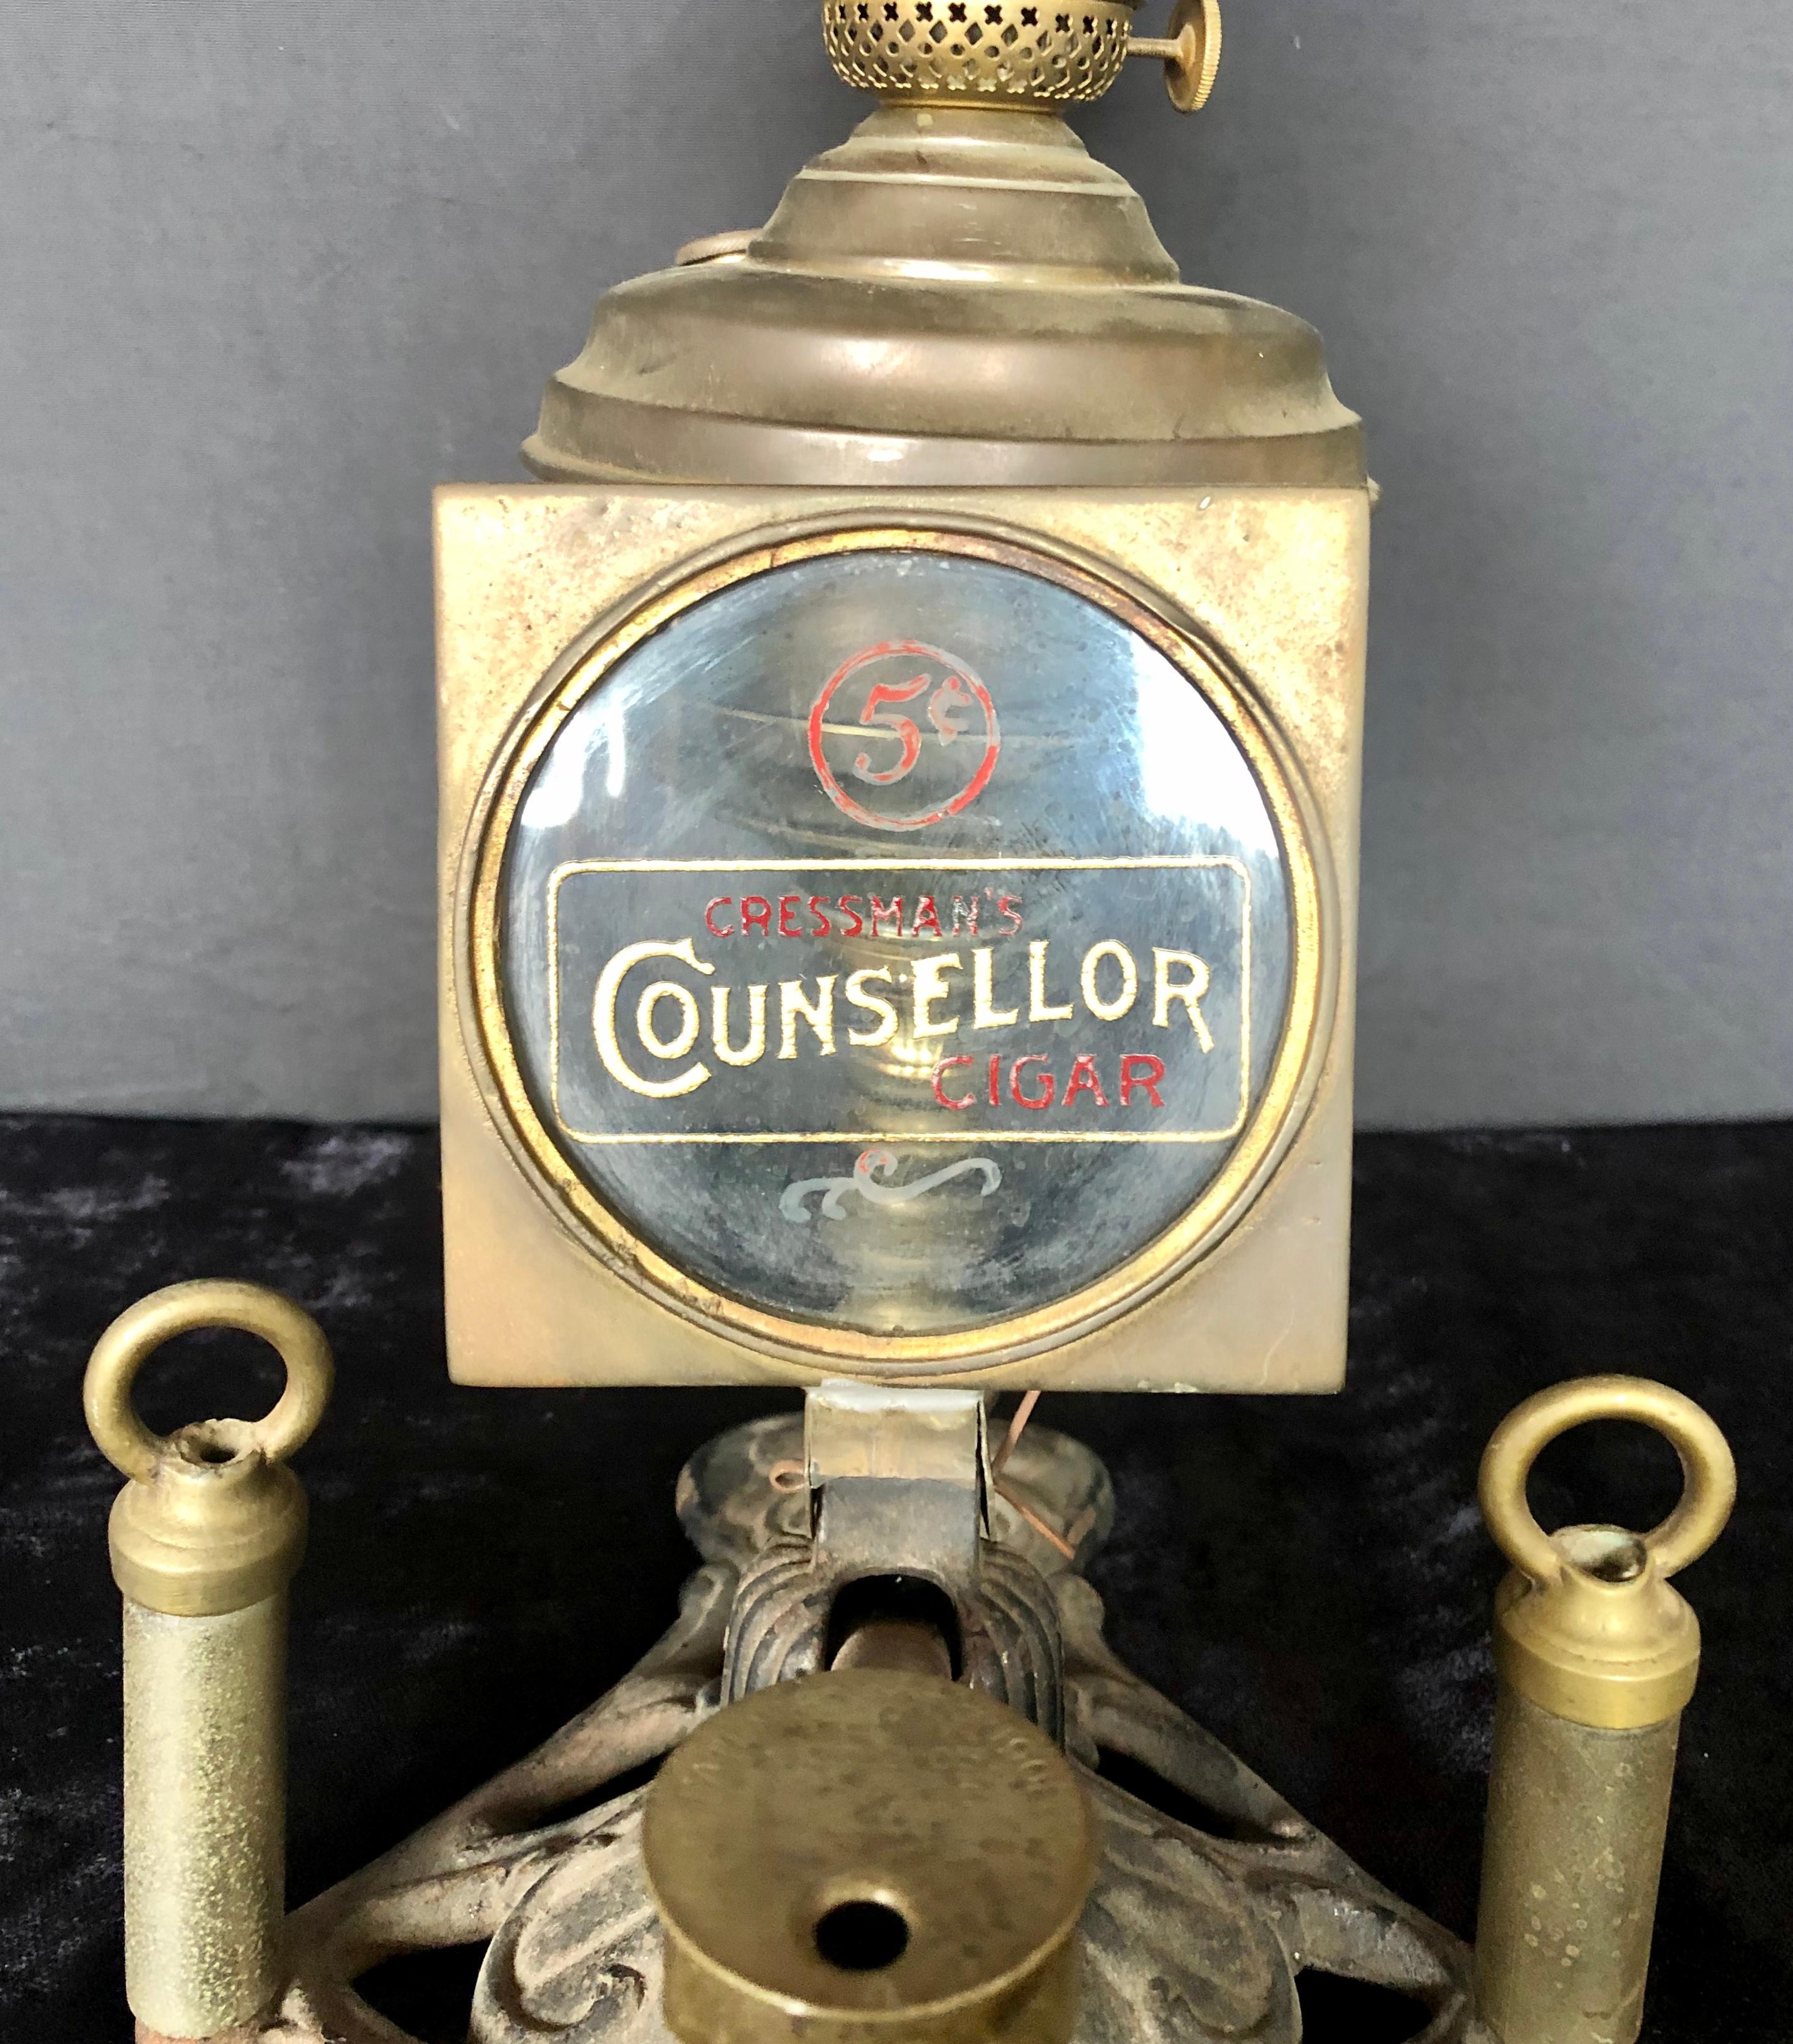 20th Century Cressman's Counsellor Cigar Lighter and Lamp with Blue Glass Globe